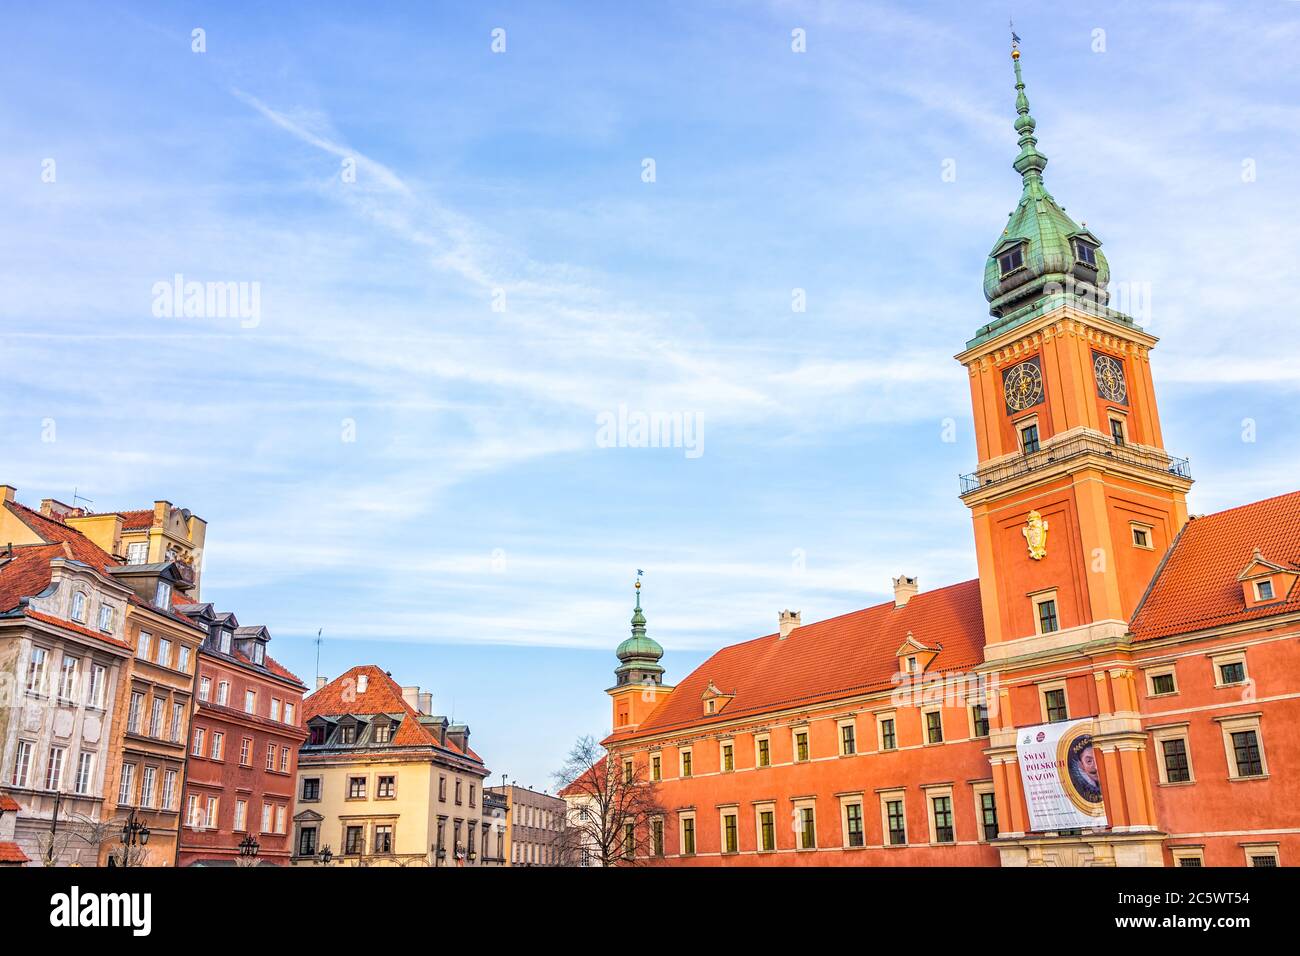 Warsaw, Poland - December 19, 2019: Old town Warszawa Christmas historic famous Castle Square with red building in capital city during winter sunset a Stock Photo